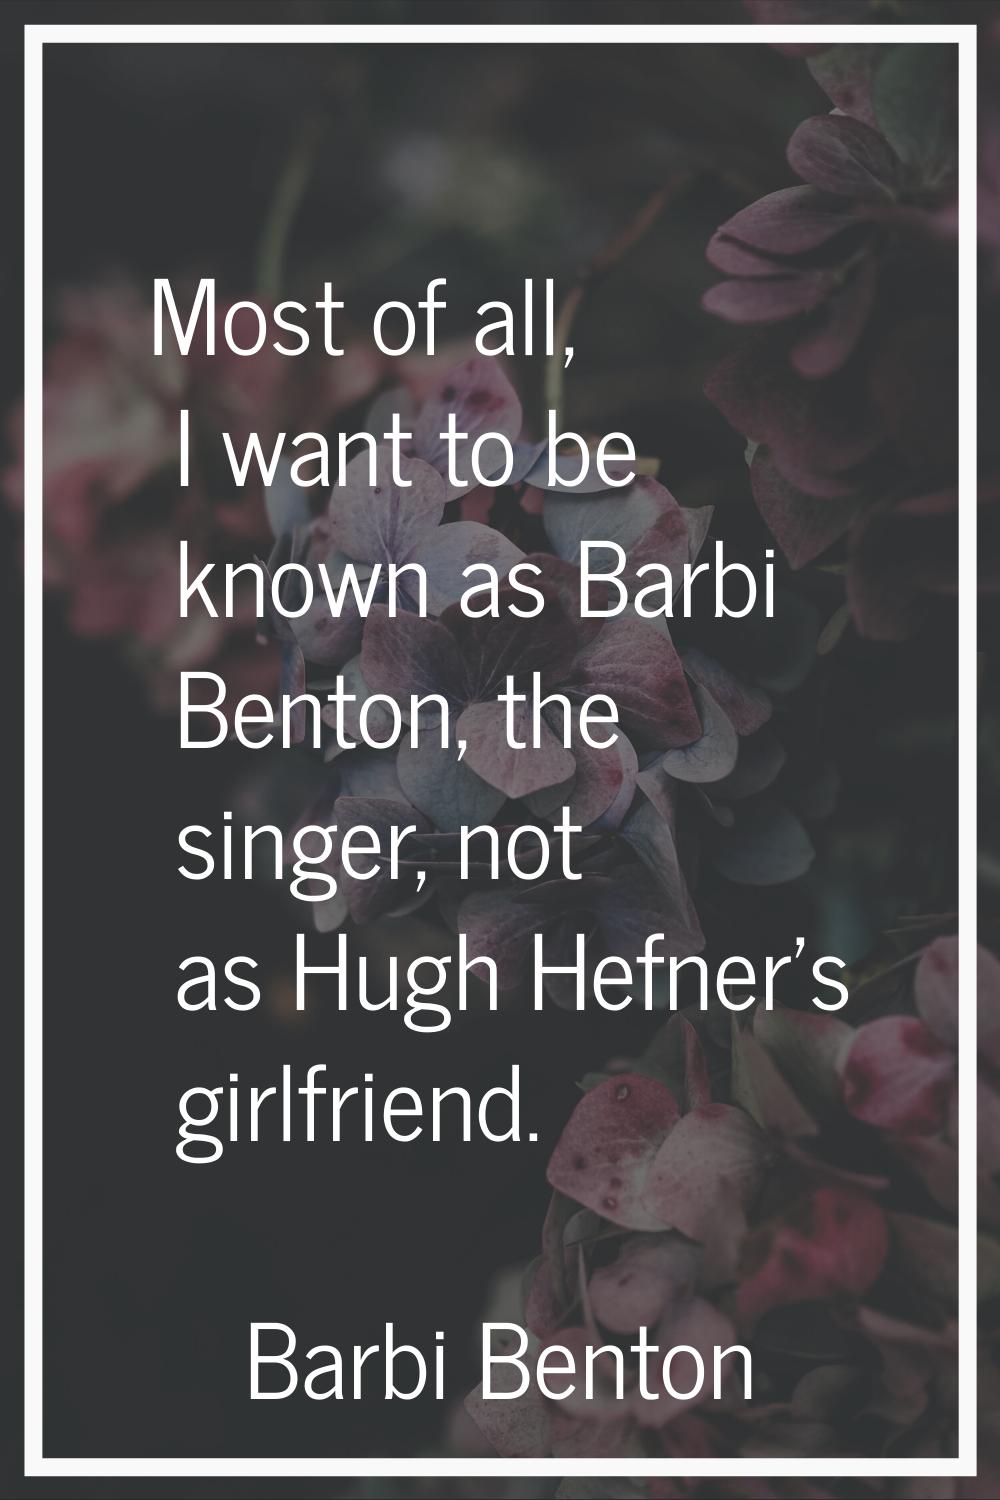 Most of all, I want to be known as Barbi Benton, the singer, not as Hugh Hefner's girlfriend.